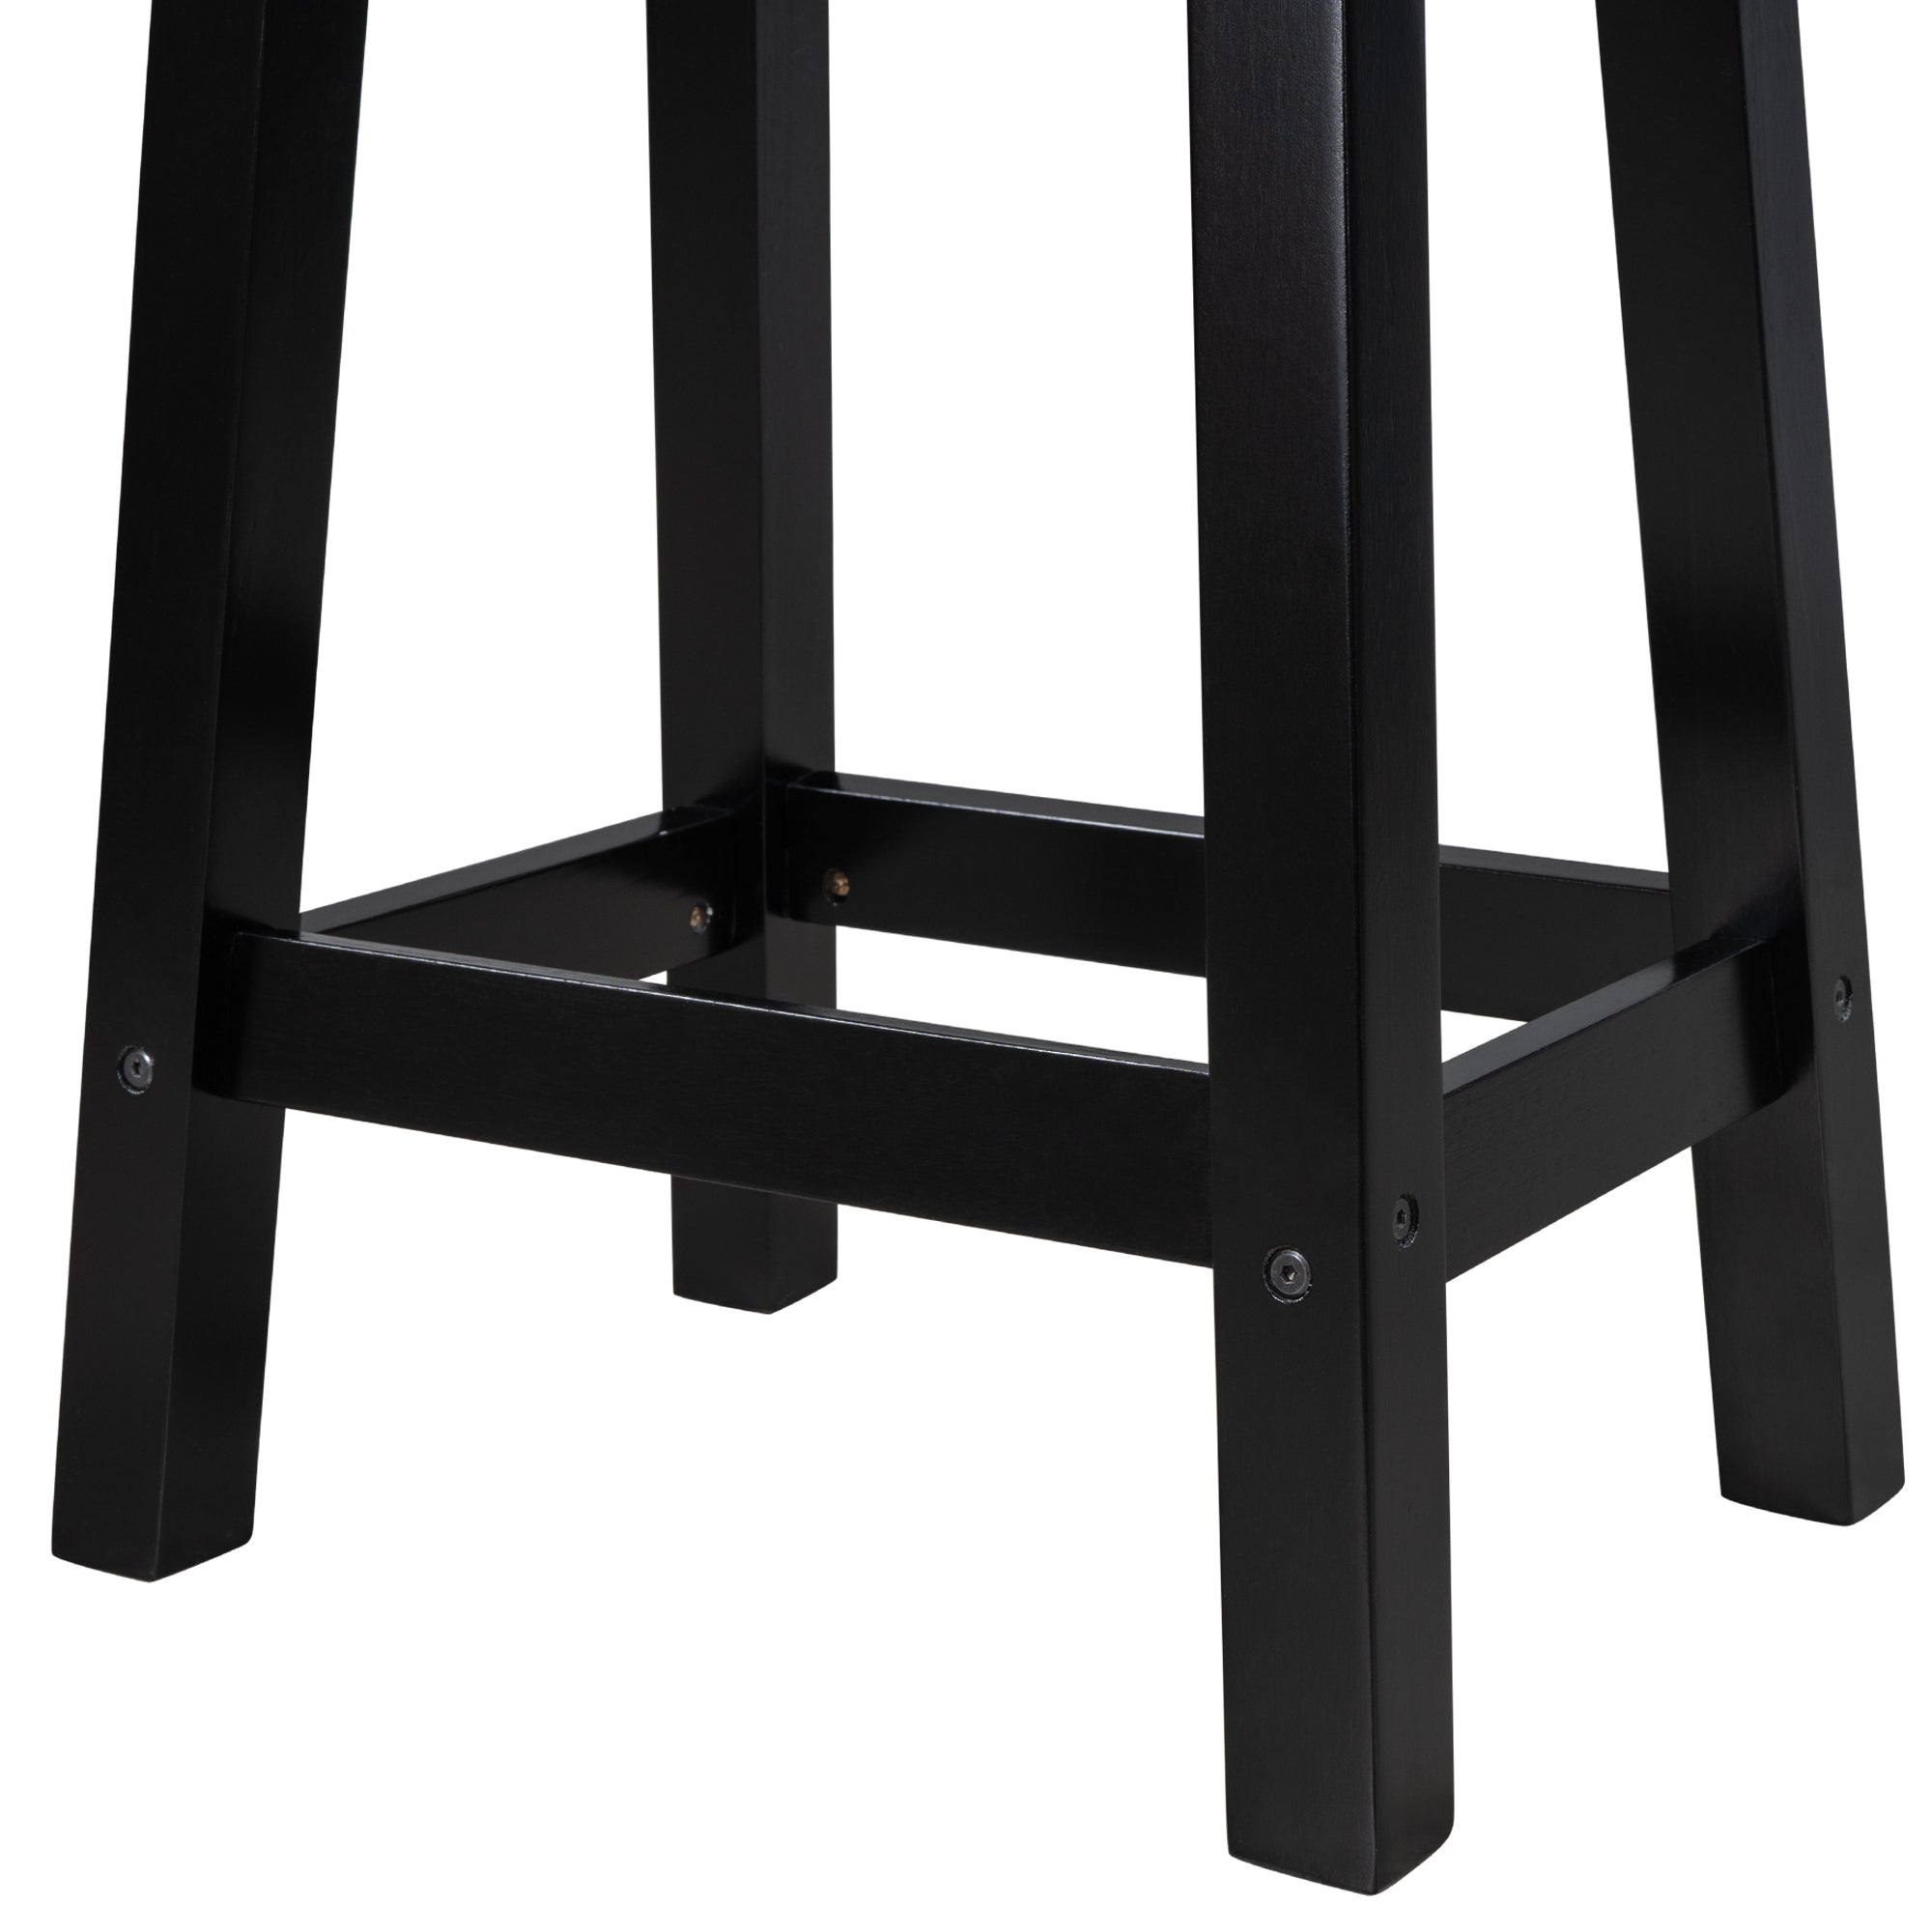 TOPMAX Solid Wood 3-Piece Set with 2 Suspended Stools 3-Tier Storage Small Place (Cherry+Black)